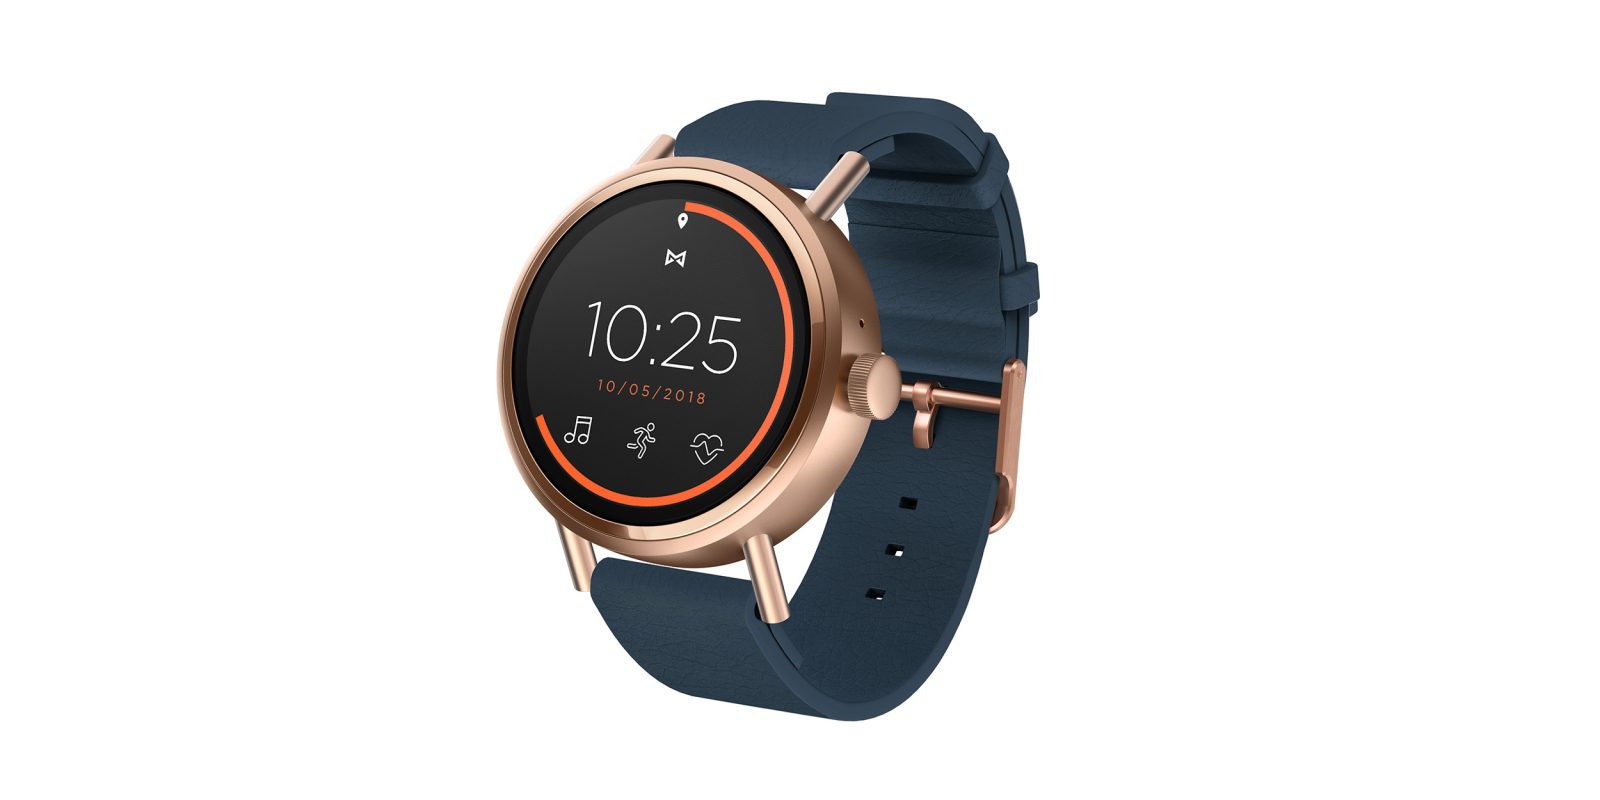 Misfit Vapor 2: Two sizes, Snapdragon 2100, NFC, GPS - 9to5Google